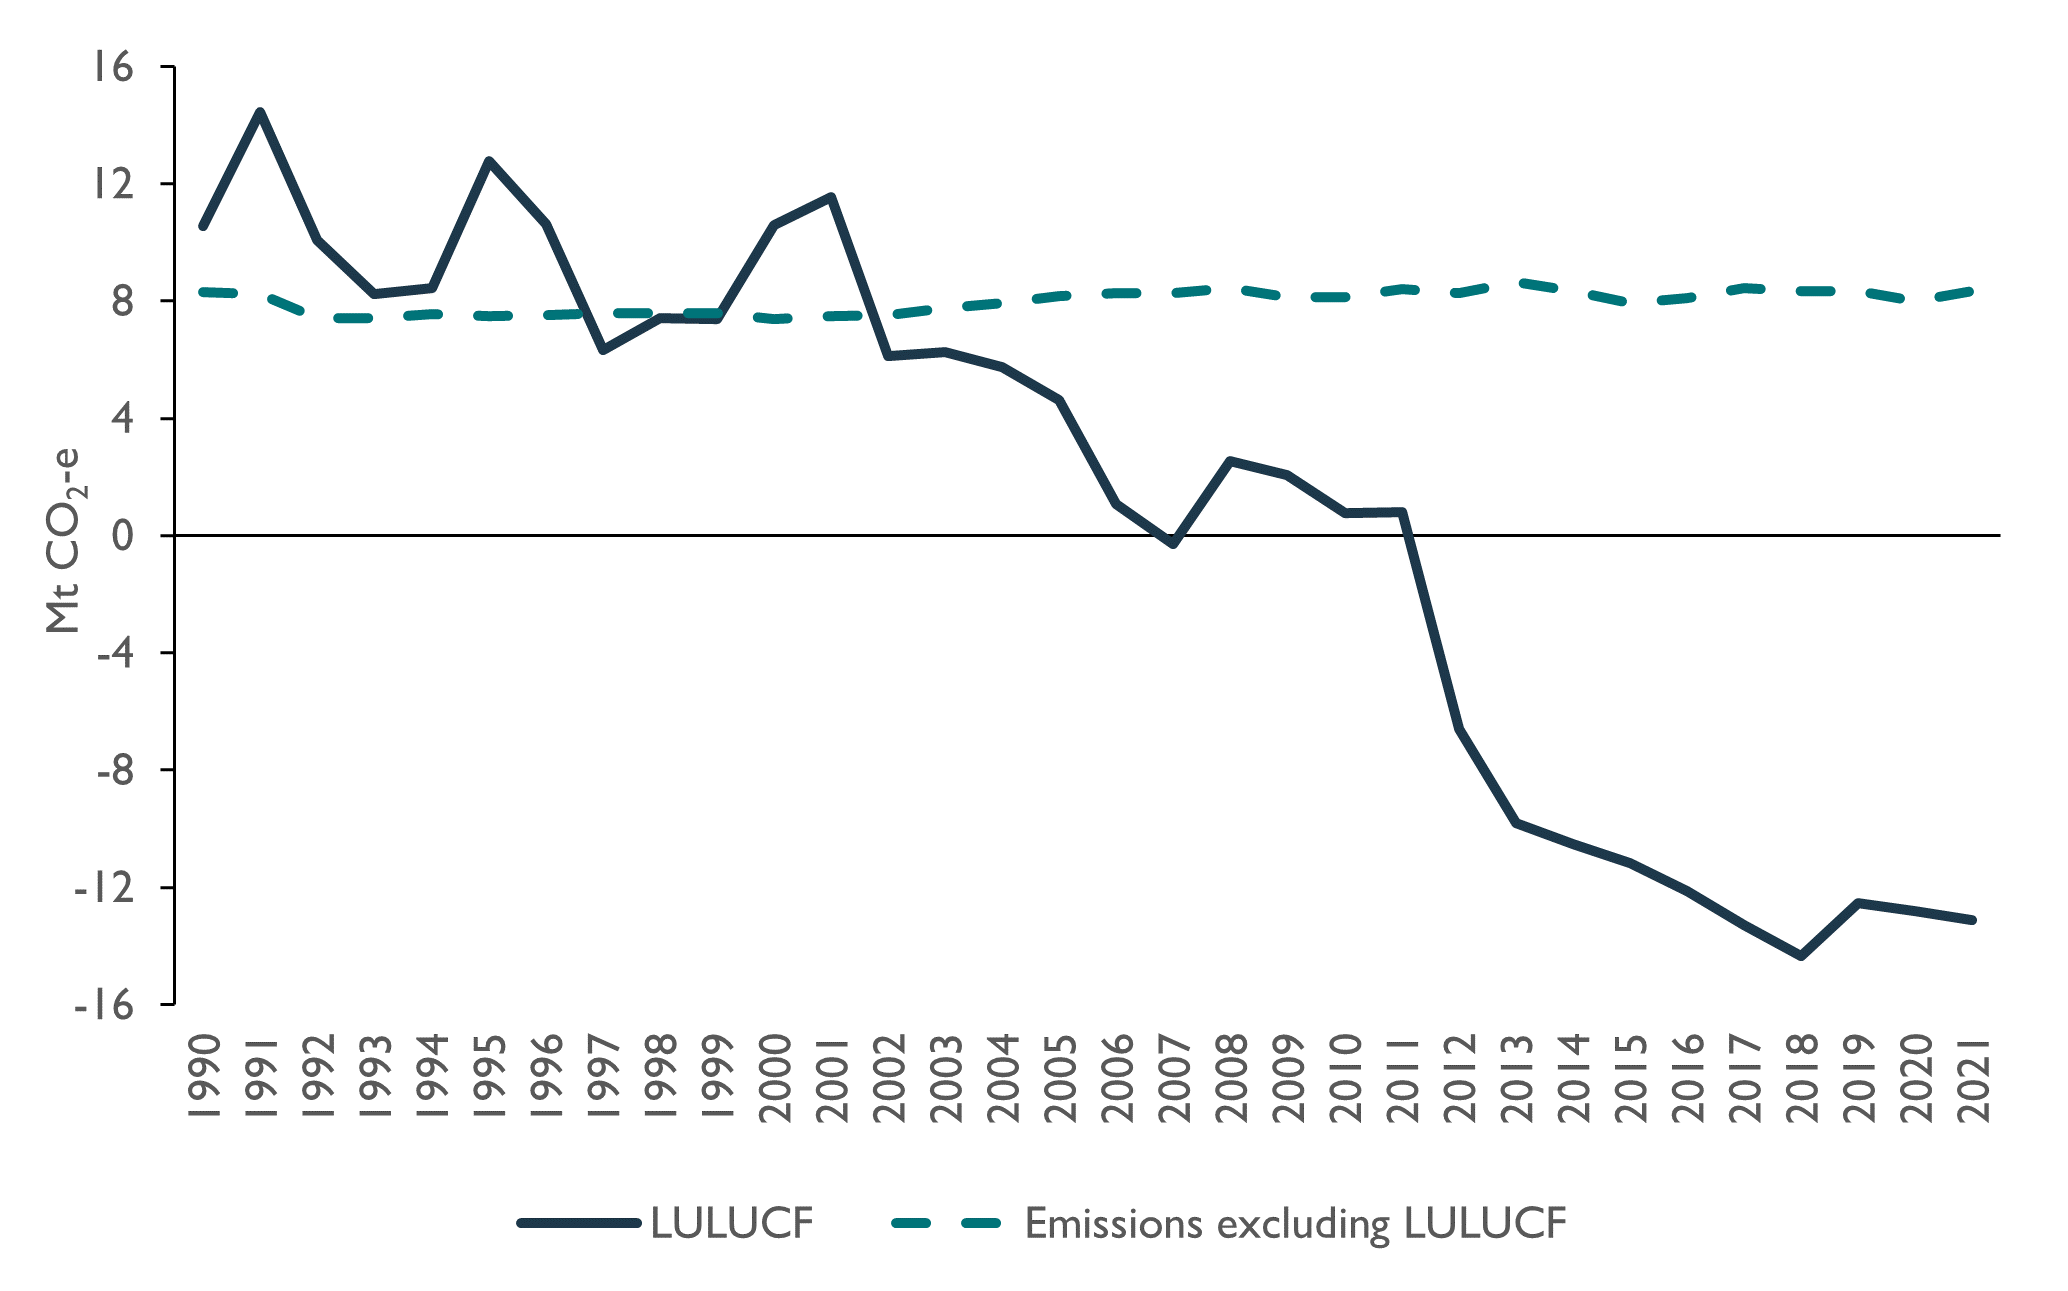 This figure includes a solid line chart that shows emissions from the LULUCF sector from 1990 to 2021 and a dashed line showing total emissions excluding LULUCF. It shows that emissions from LULUCF fluctuated significantly since 1990, from 10.55 Mt CO2-e in 1990, to 10.57 Mt CO2-e in 2000, decreasing in stepped increments to become a carbon sink for the first time in 2007 with minus 0.28 Mt CO2-e, increasing to 2.53 Mt CO2-e in 2008, before again falling sharply in 2012 with minus 6.59 Mt CO2-e, and reaching minus 13.13 Mt CO2-e in 2021. The dashed line shows Tasmania's emissions excluding LULUCF remained relatively steady, from 8.30 Mt CO2-e in 1990 to 8.33 Mt CO2-e in 2021.